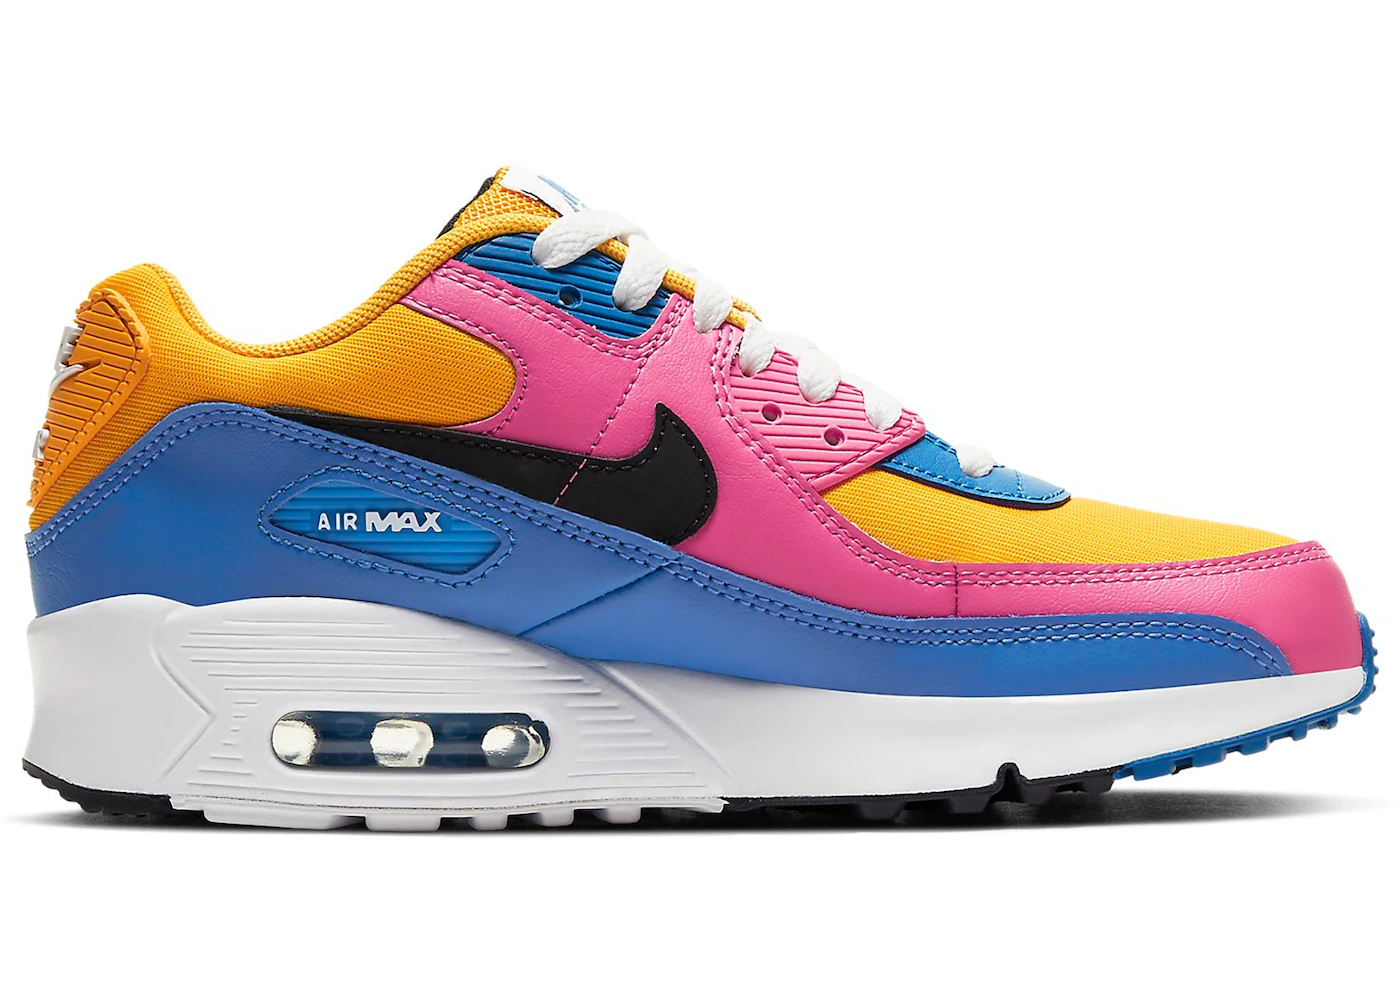 Nike Air Max 90 Leather Multi-Color (GS) Kids' - CD6864-700 - US